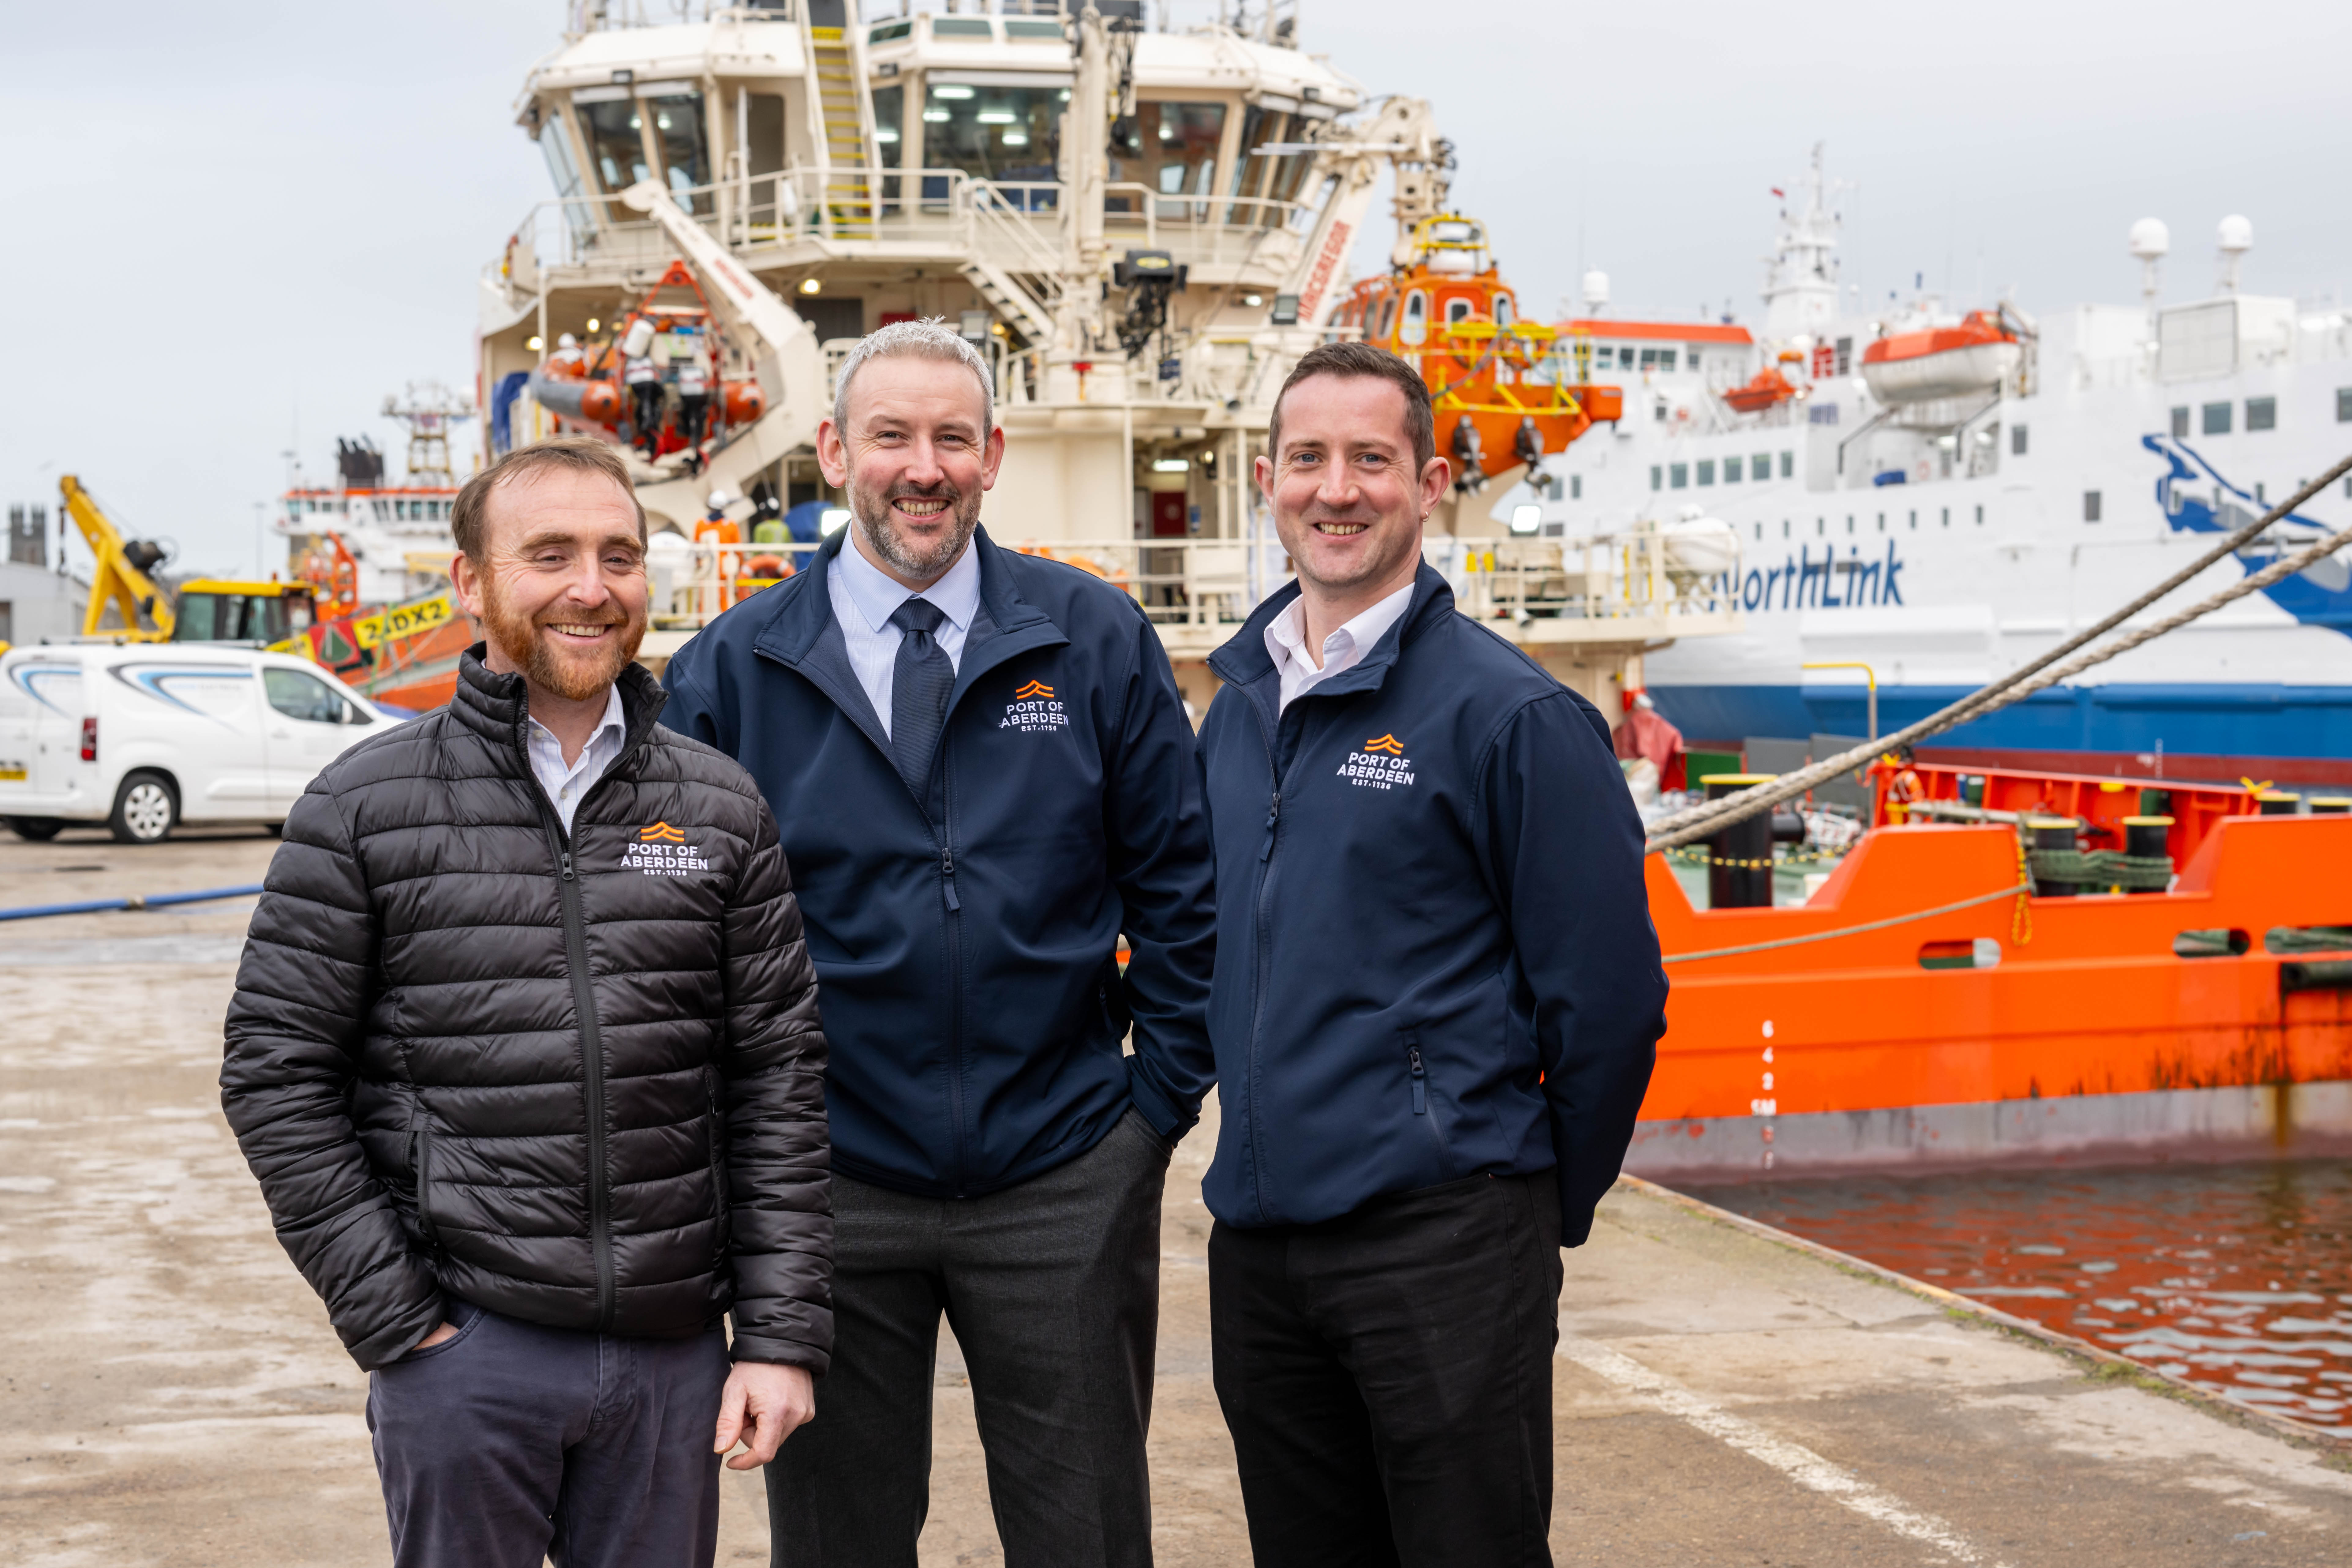 MEMBER NEWS: Port of Aberdeen strengthens leadership team with strategic appointments